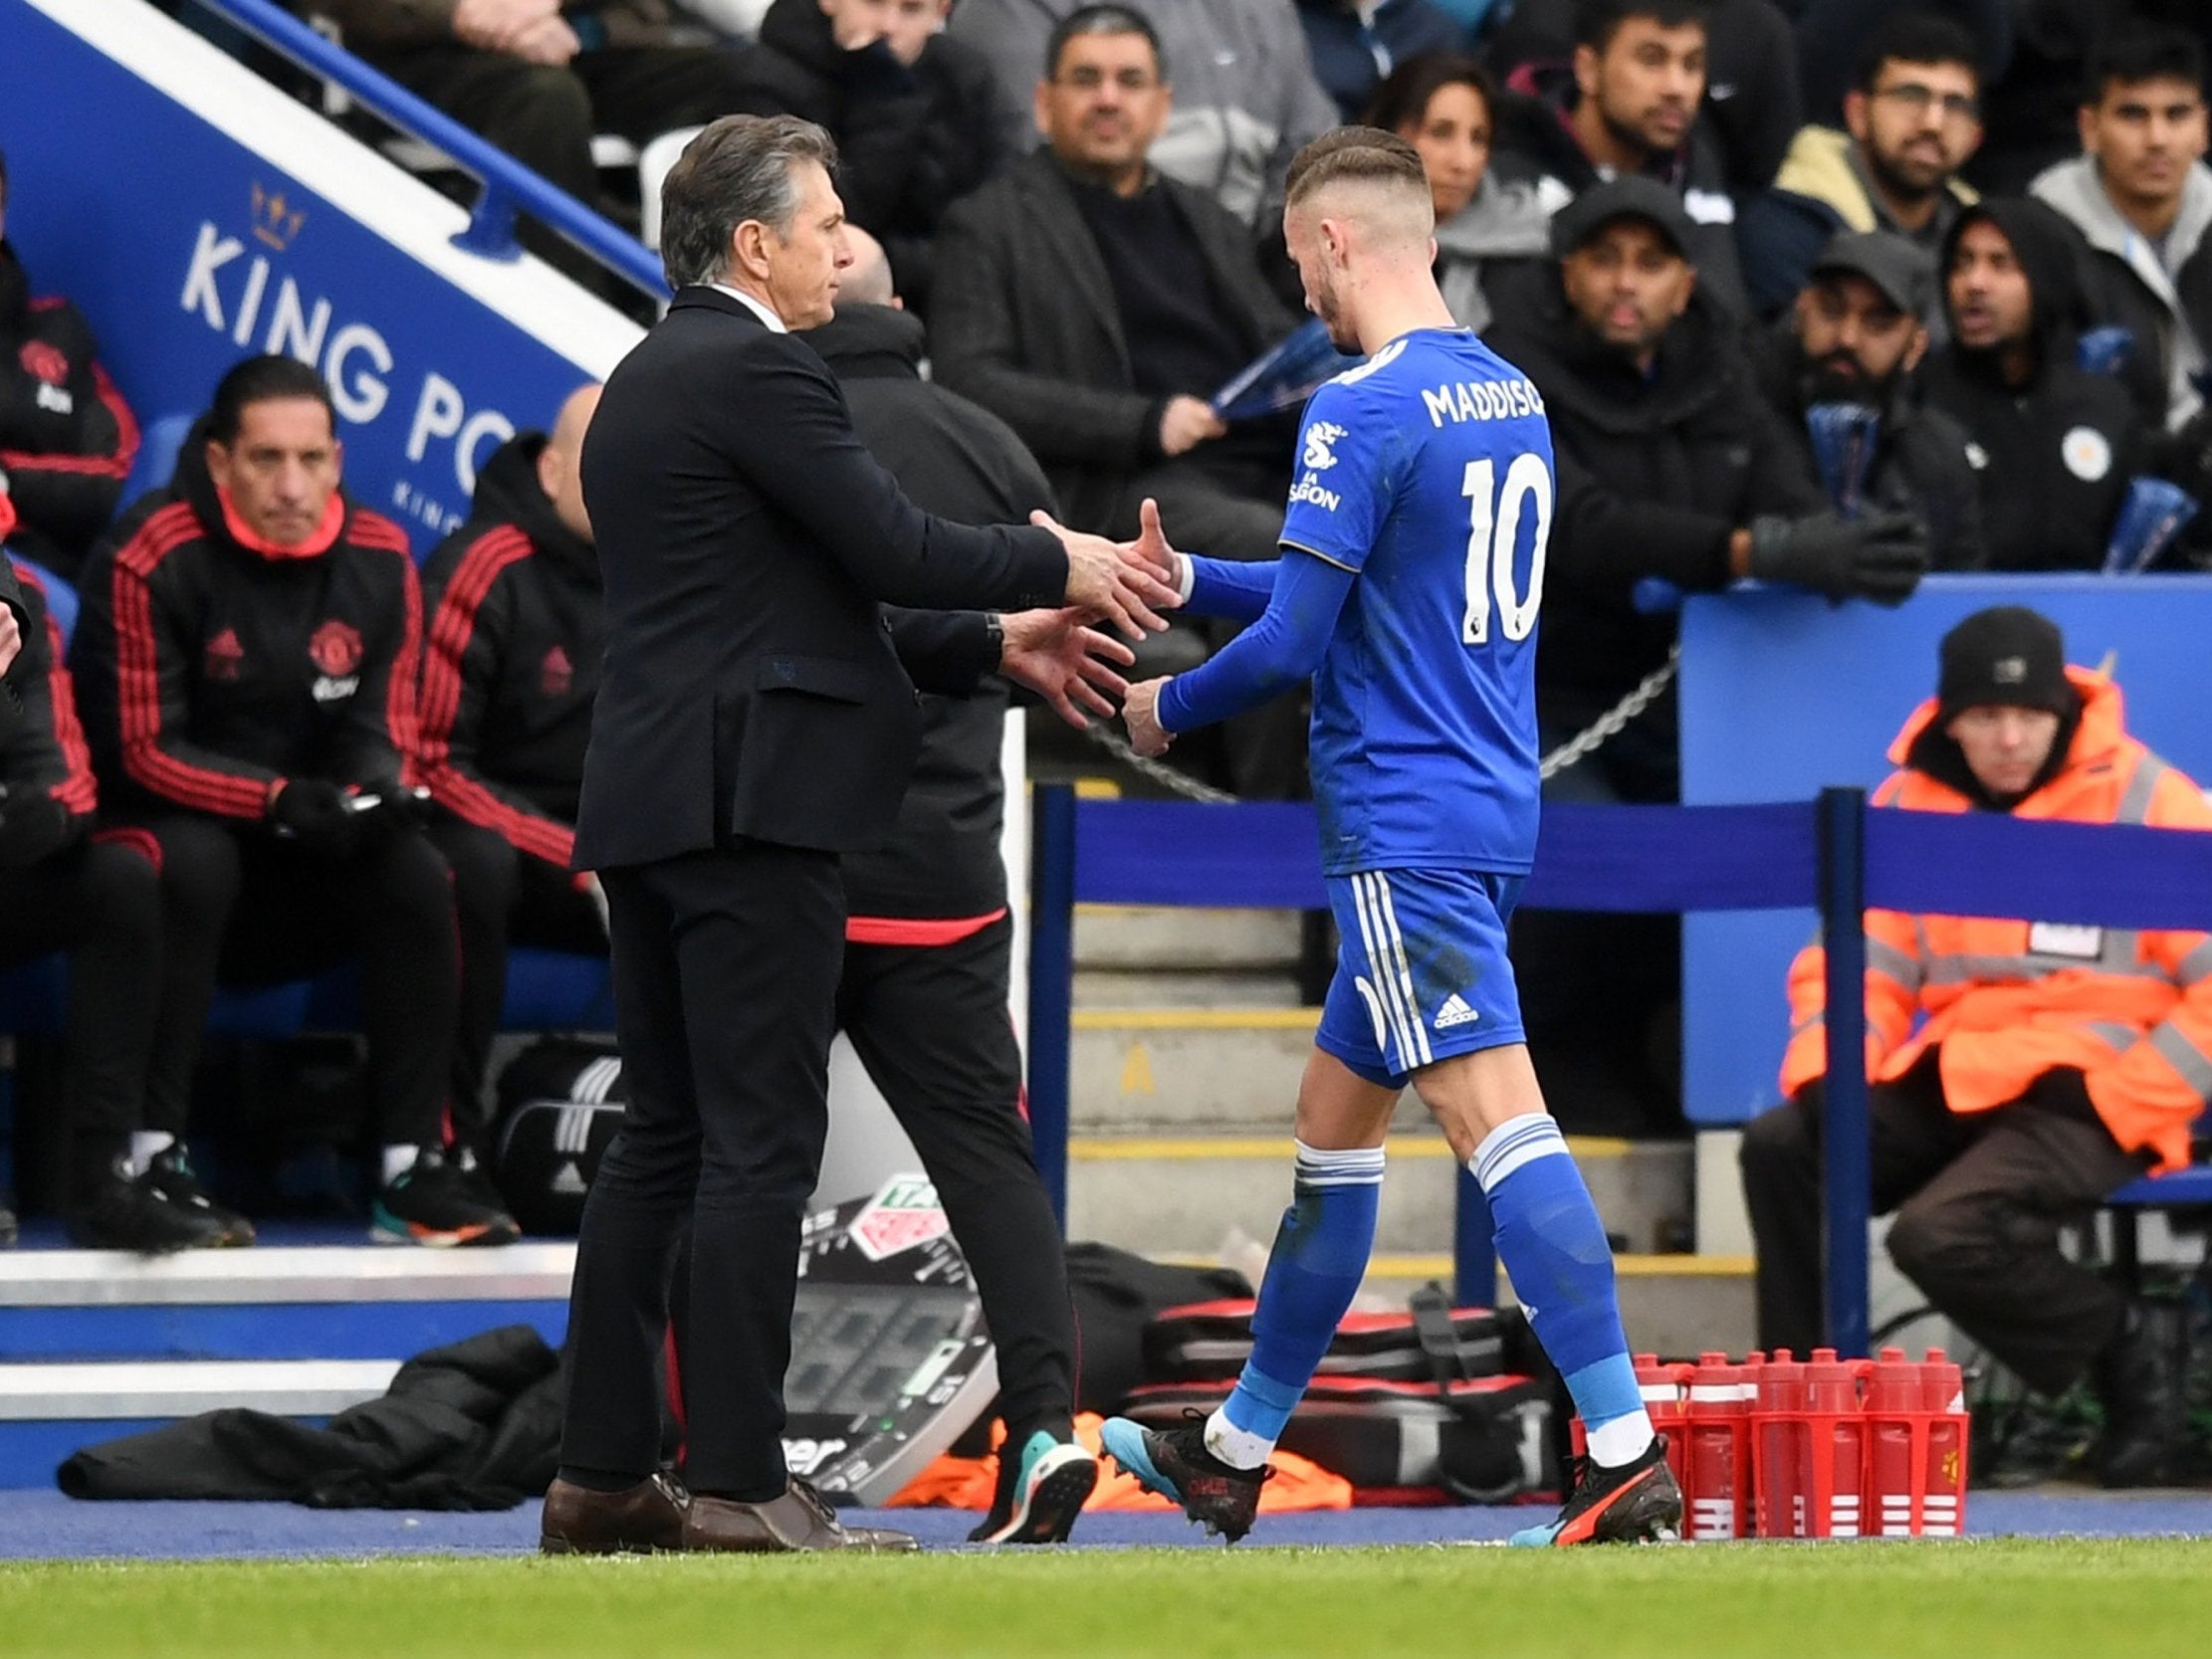 The Leicester manager was booed by some supporters for bringing James Maddison off in the second half